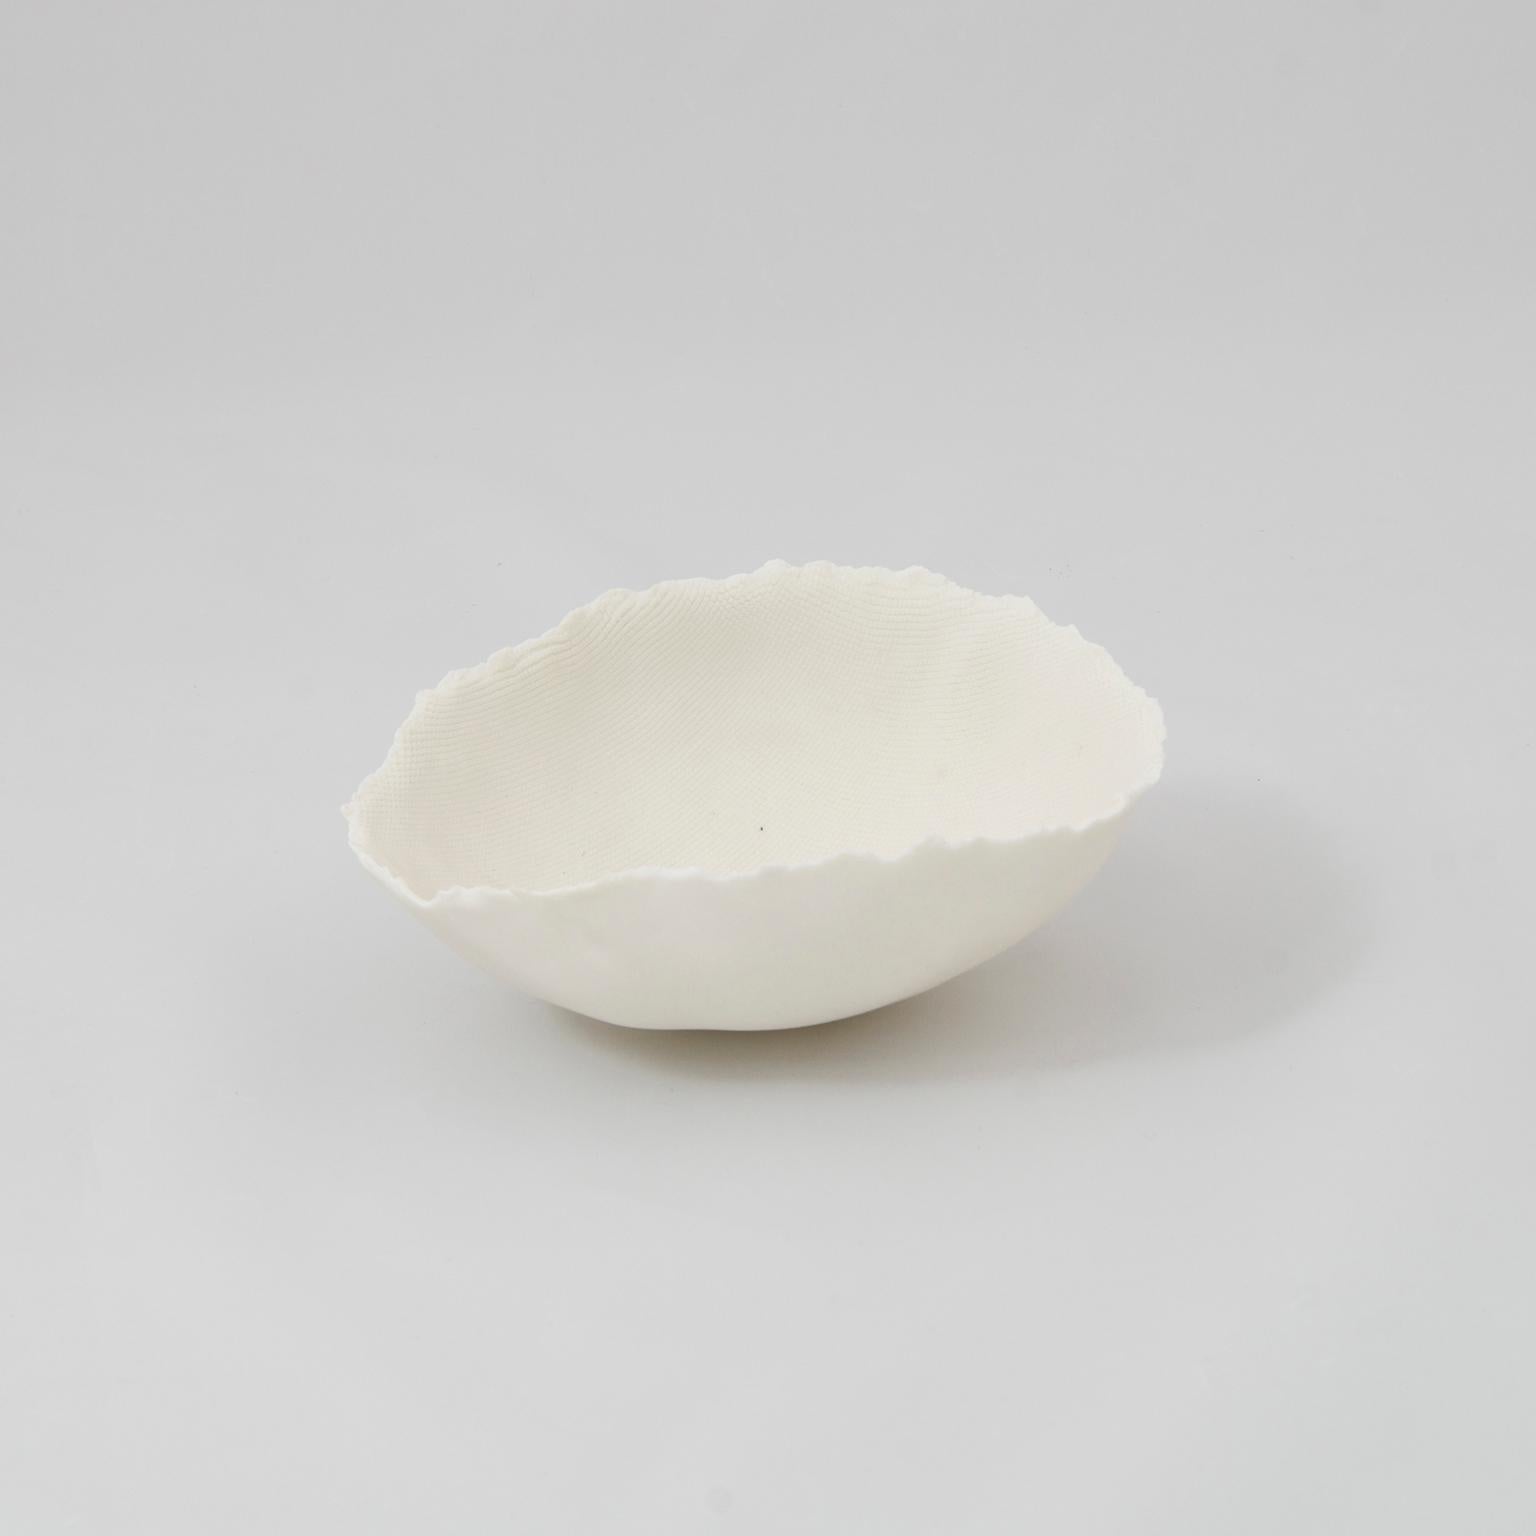 Each bowl is handcrafted by Mexican artisans. Slight variations in shape and size are to be expected and embraced as they add to the uniqueness of every piece.
This porcelain bowl can be used for decoration or as a plate for appetizers. It is